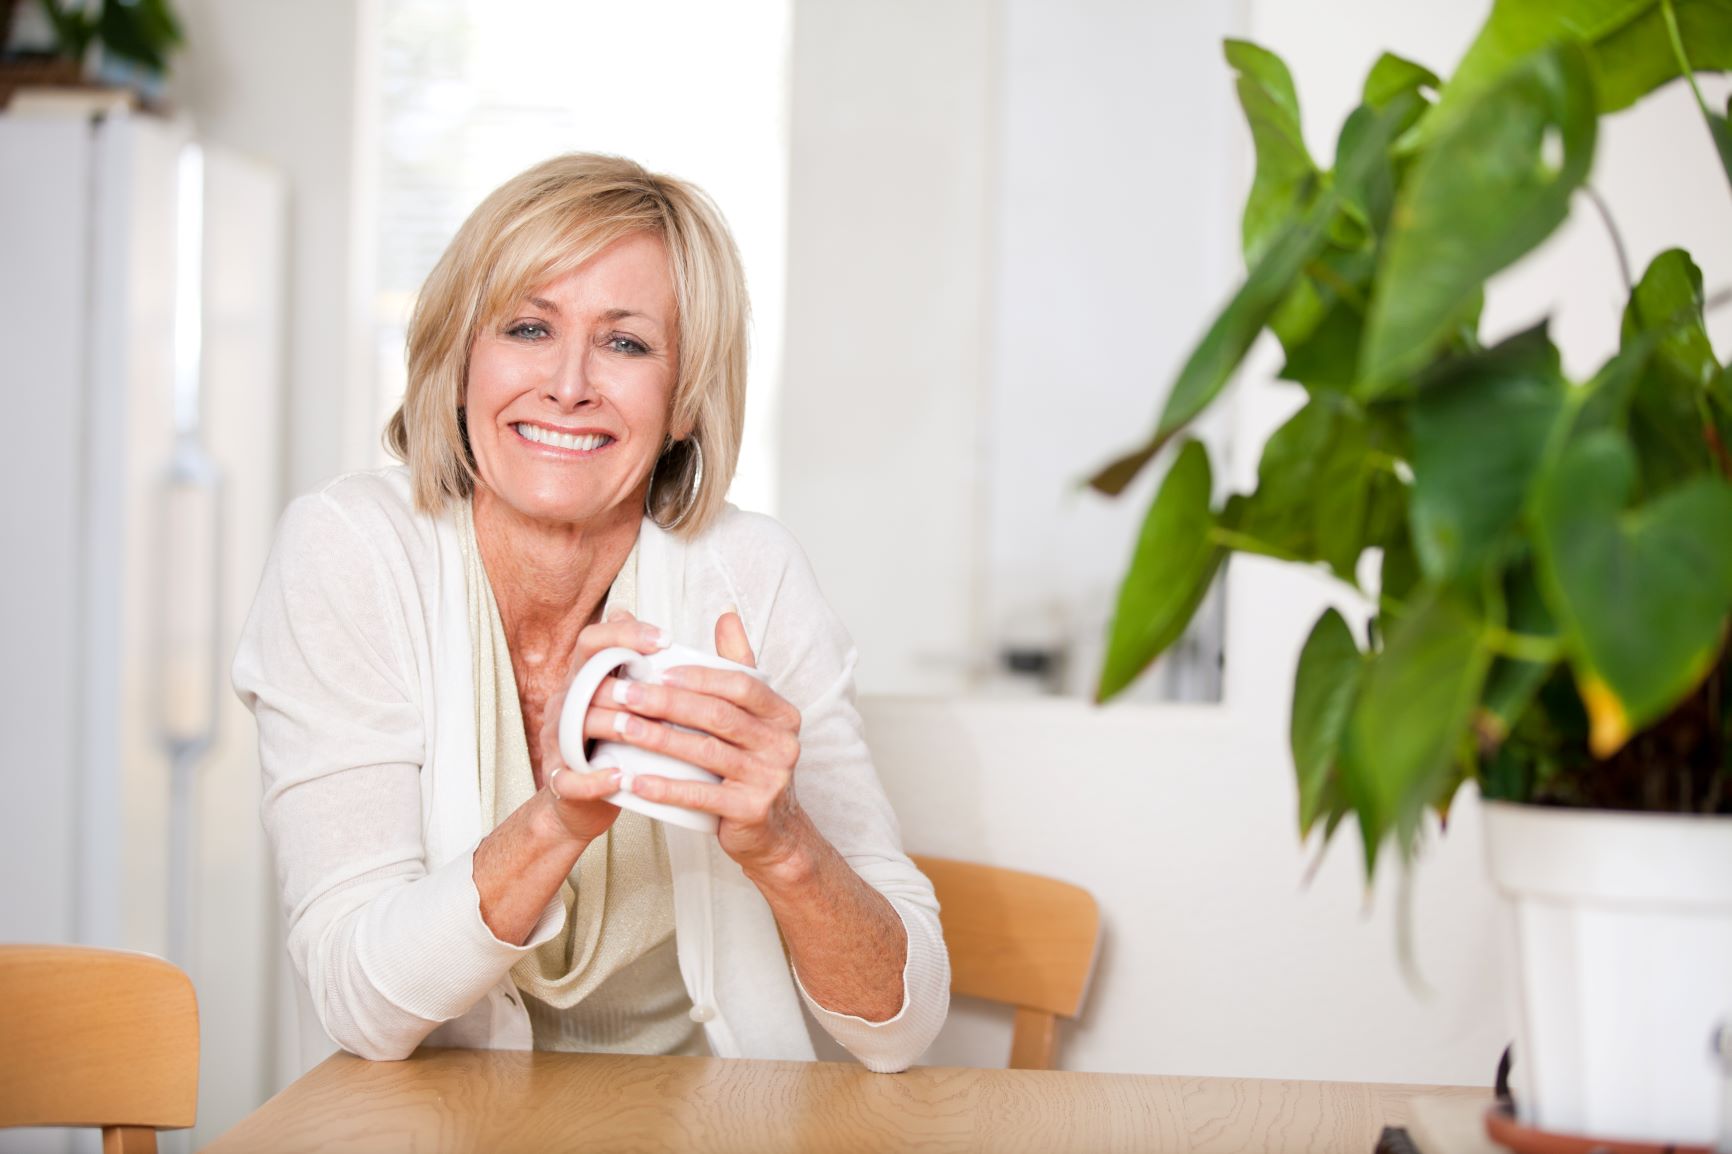 Smiling woman in her fifties holding a mug